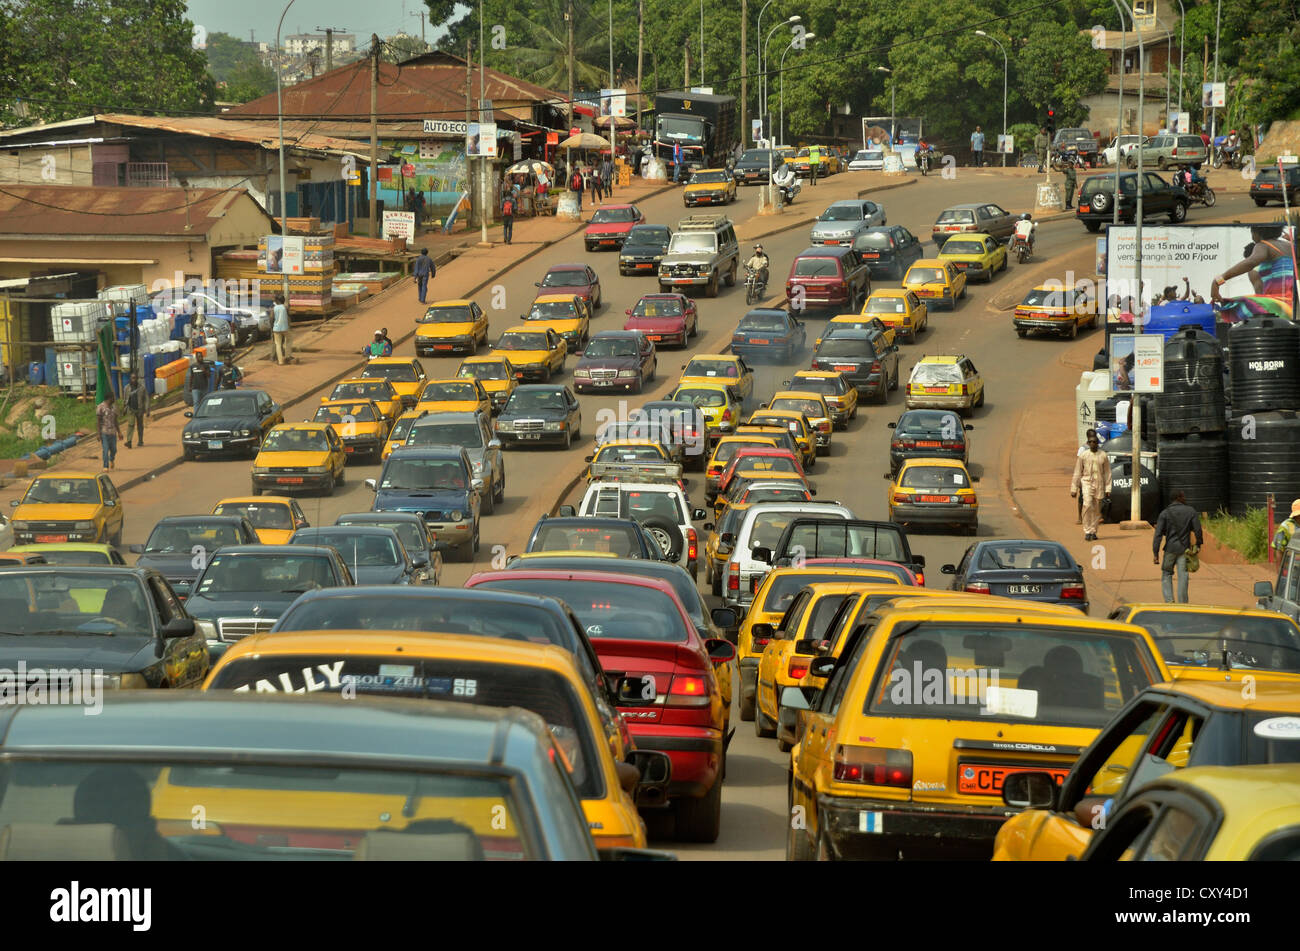 Static traffic in Yaoundé, capital of Cameroon, Central Africa, Africa Stock Photo